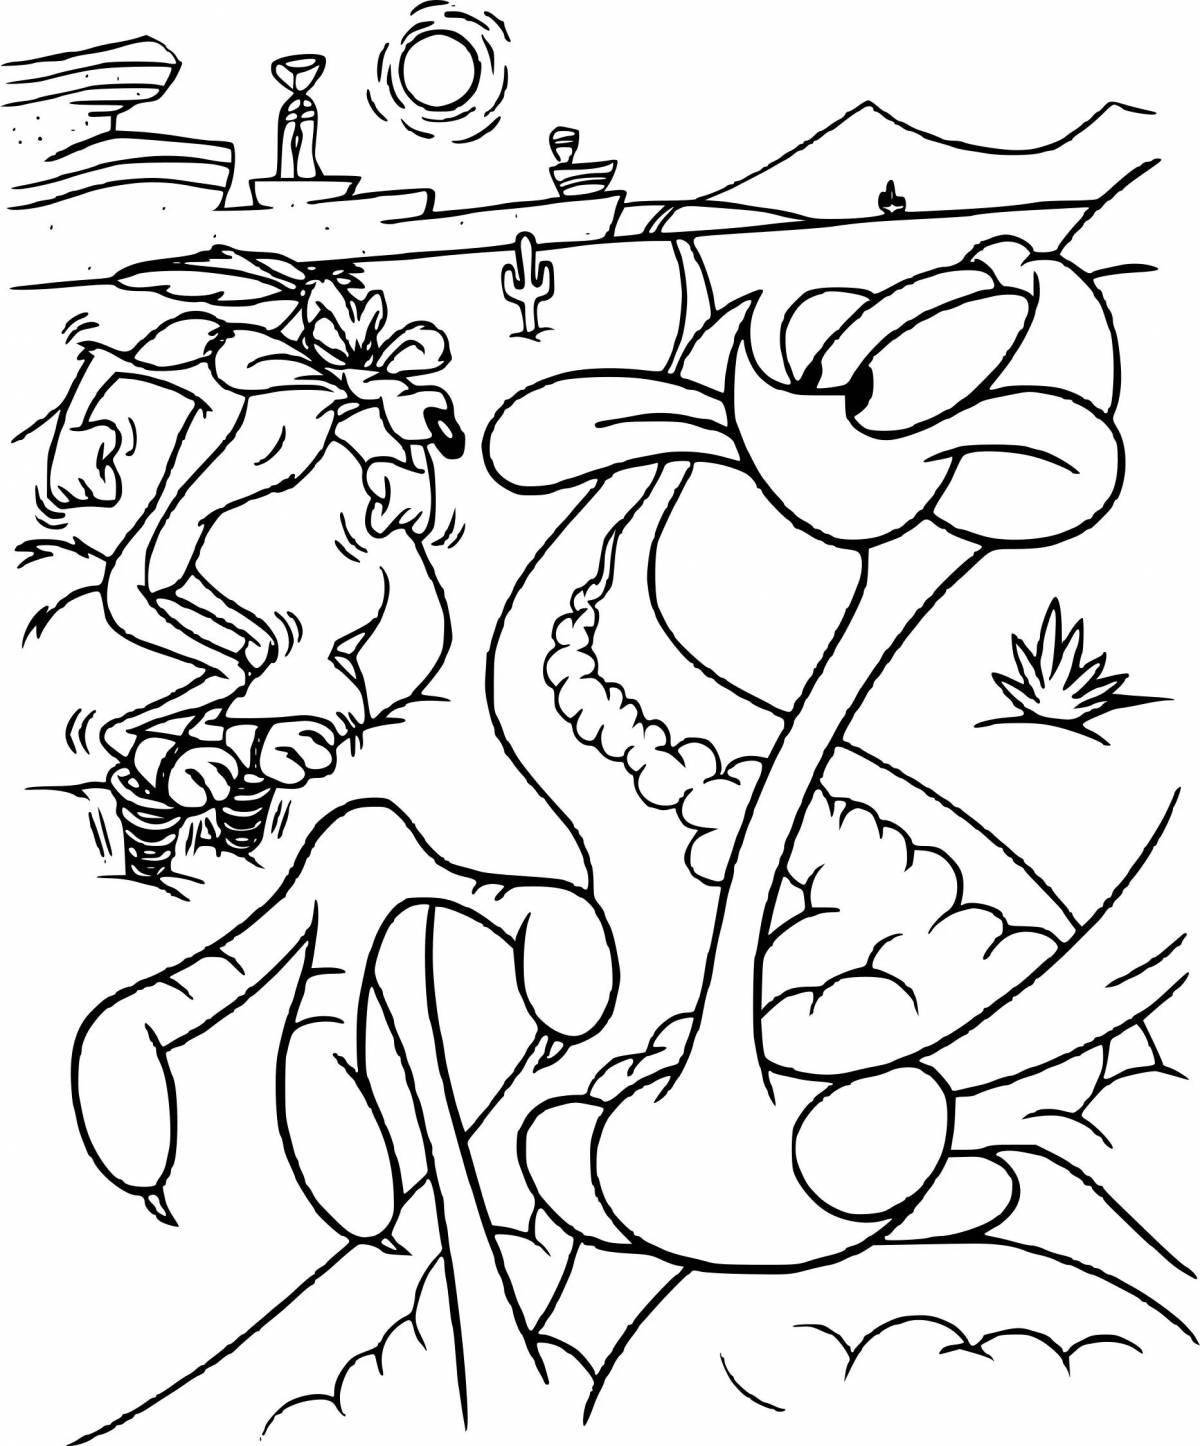 Animated road runner coloring page